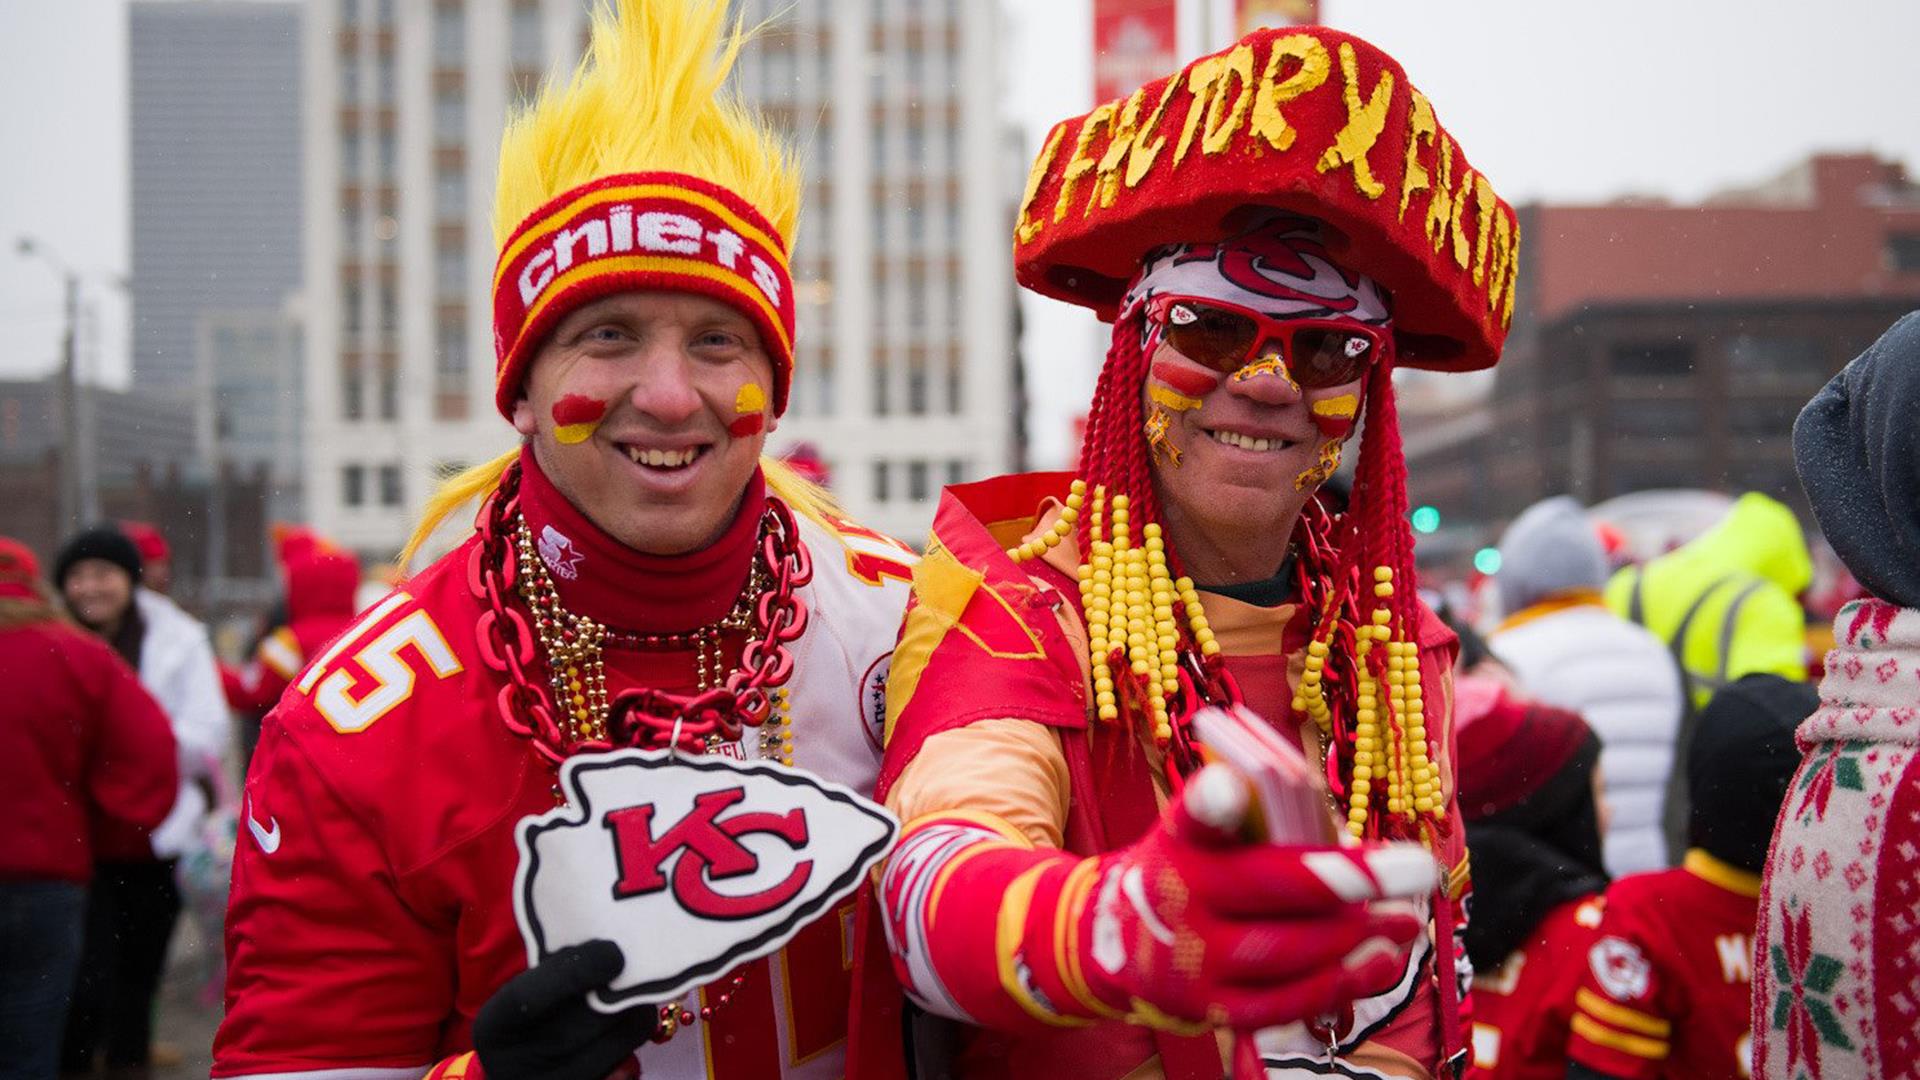 Kansas City Chiefs Super Bowl parade rolls on after earlier car chase